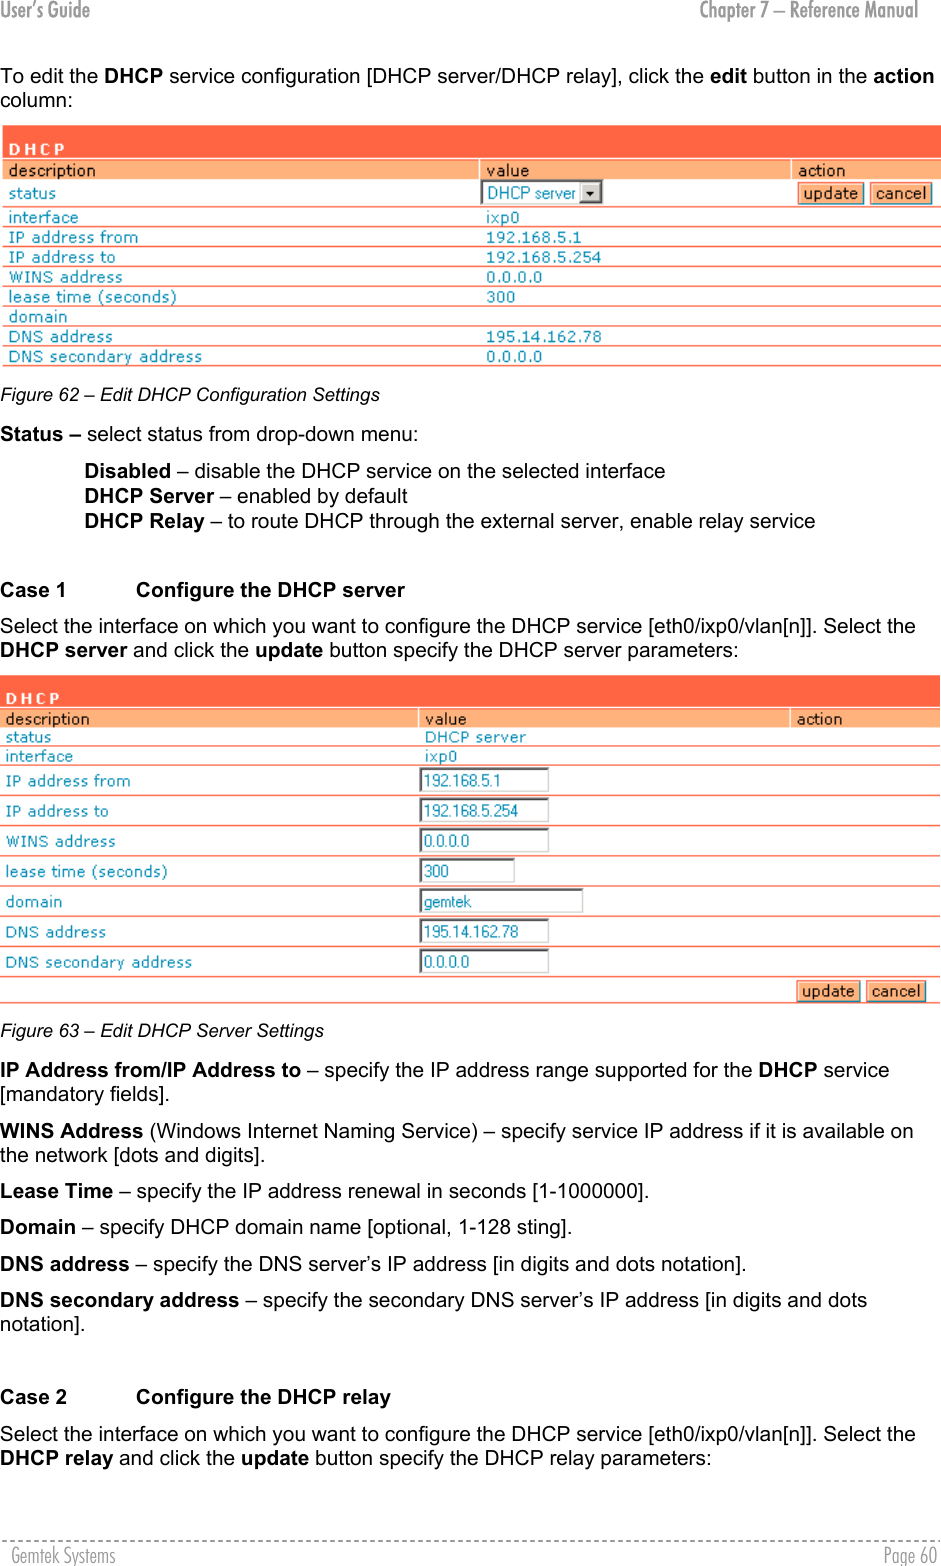 User’s Guide  Chapter 7 – Reference Manual To edit the DHCP service configuration [DHCP server/DHCP relay], click the edit button in the action column:  Figure 62 – Edit DHCP Configuration Settings Status – select status from drop-down menu: Disabled – disable the DHCP service on the selected interface DHCP Server – enabled by default DHCP Relay – to route DHCP through the external server, enable relay service  Case 1  Configure the DHCP server  Select the interface on which you want to configure the DHCP service [eth0/ixp0/vlan[n]]. Select the DHCP server and click the update button specify the DHCP server parameters:  Figure 63 – Edit DHCP Server Settings  IP Address from/IP Address to – specify the IP address range supported for the DHCP service [mandatory fields]. WINS Address (Windows Internet Naming Service) – specify service IP address if it is available on the network [dots and digits]. Lease Time – specify the IP address renewal in seconds [1-1000000]. Domain – specify DHCP domain name [optional, 1-128 sting]. DNS address – specify the DNS server’s IP address [in digits and dots notation]. DNS secondary address – specify the secondary DNS server’s IP address [in digits and dots notation].  Case 2  Configure the DHCP relay Select the interface on which you want to configure the DHCP service [eth0/ixp0/vlan[n]]. Select the DHCP relay and click the update button specify the DHCP relay parameters: Gemtek Systems    Page 60  